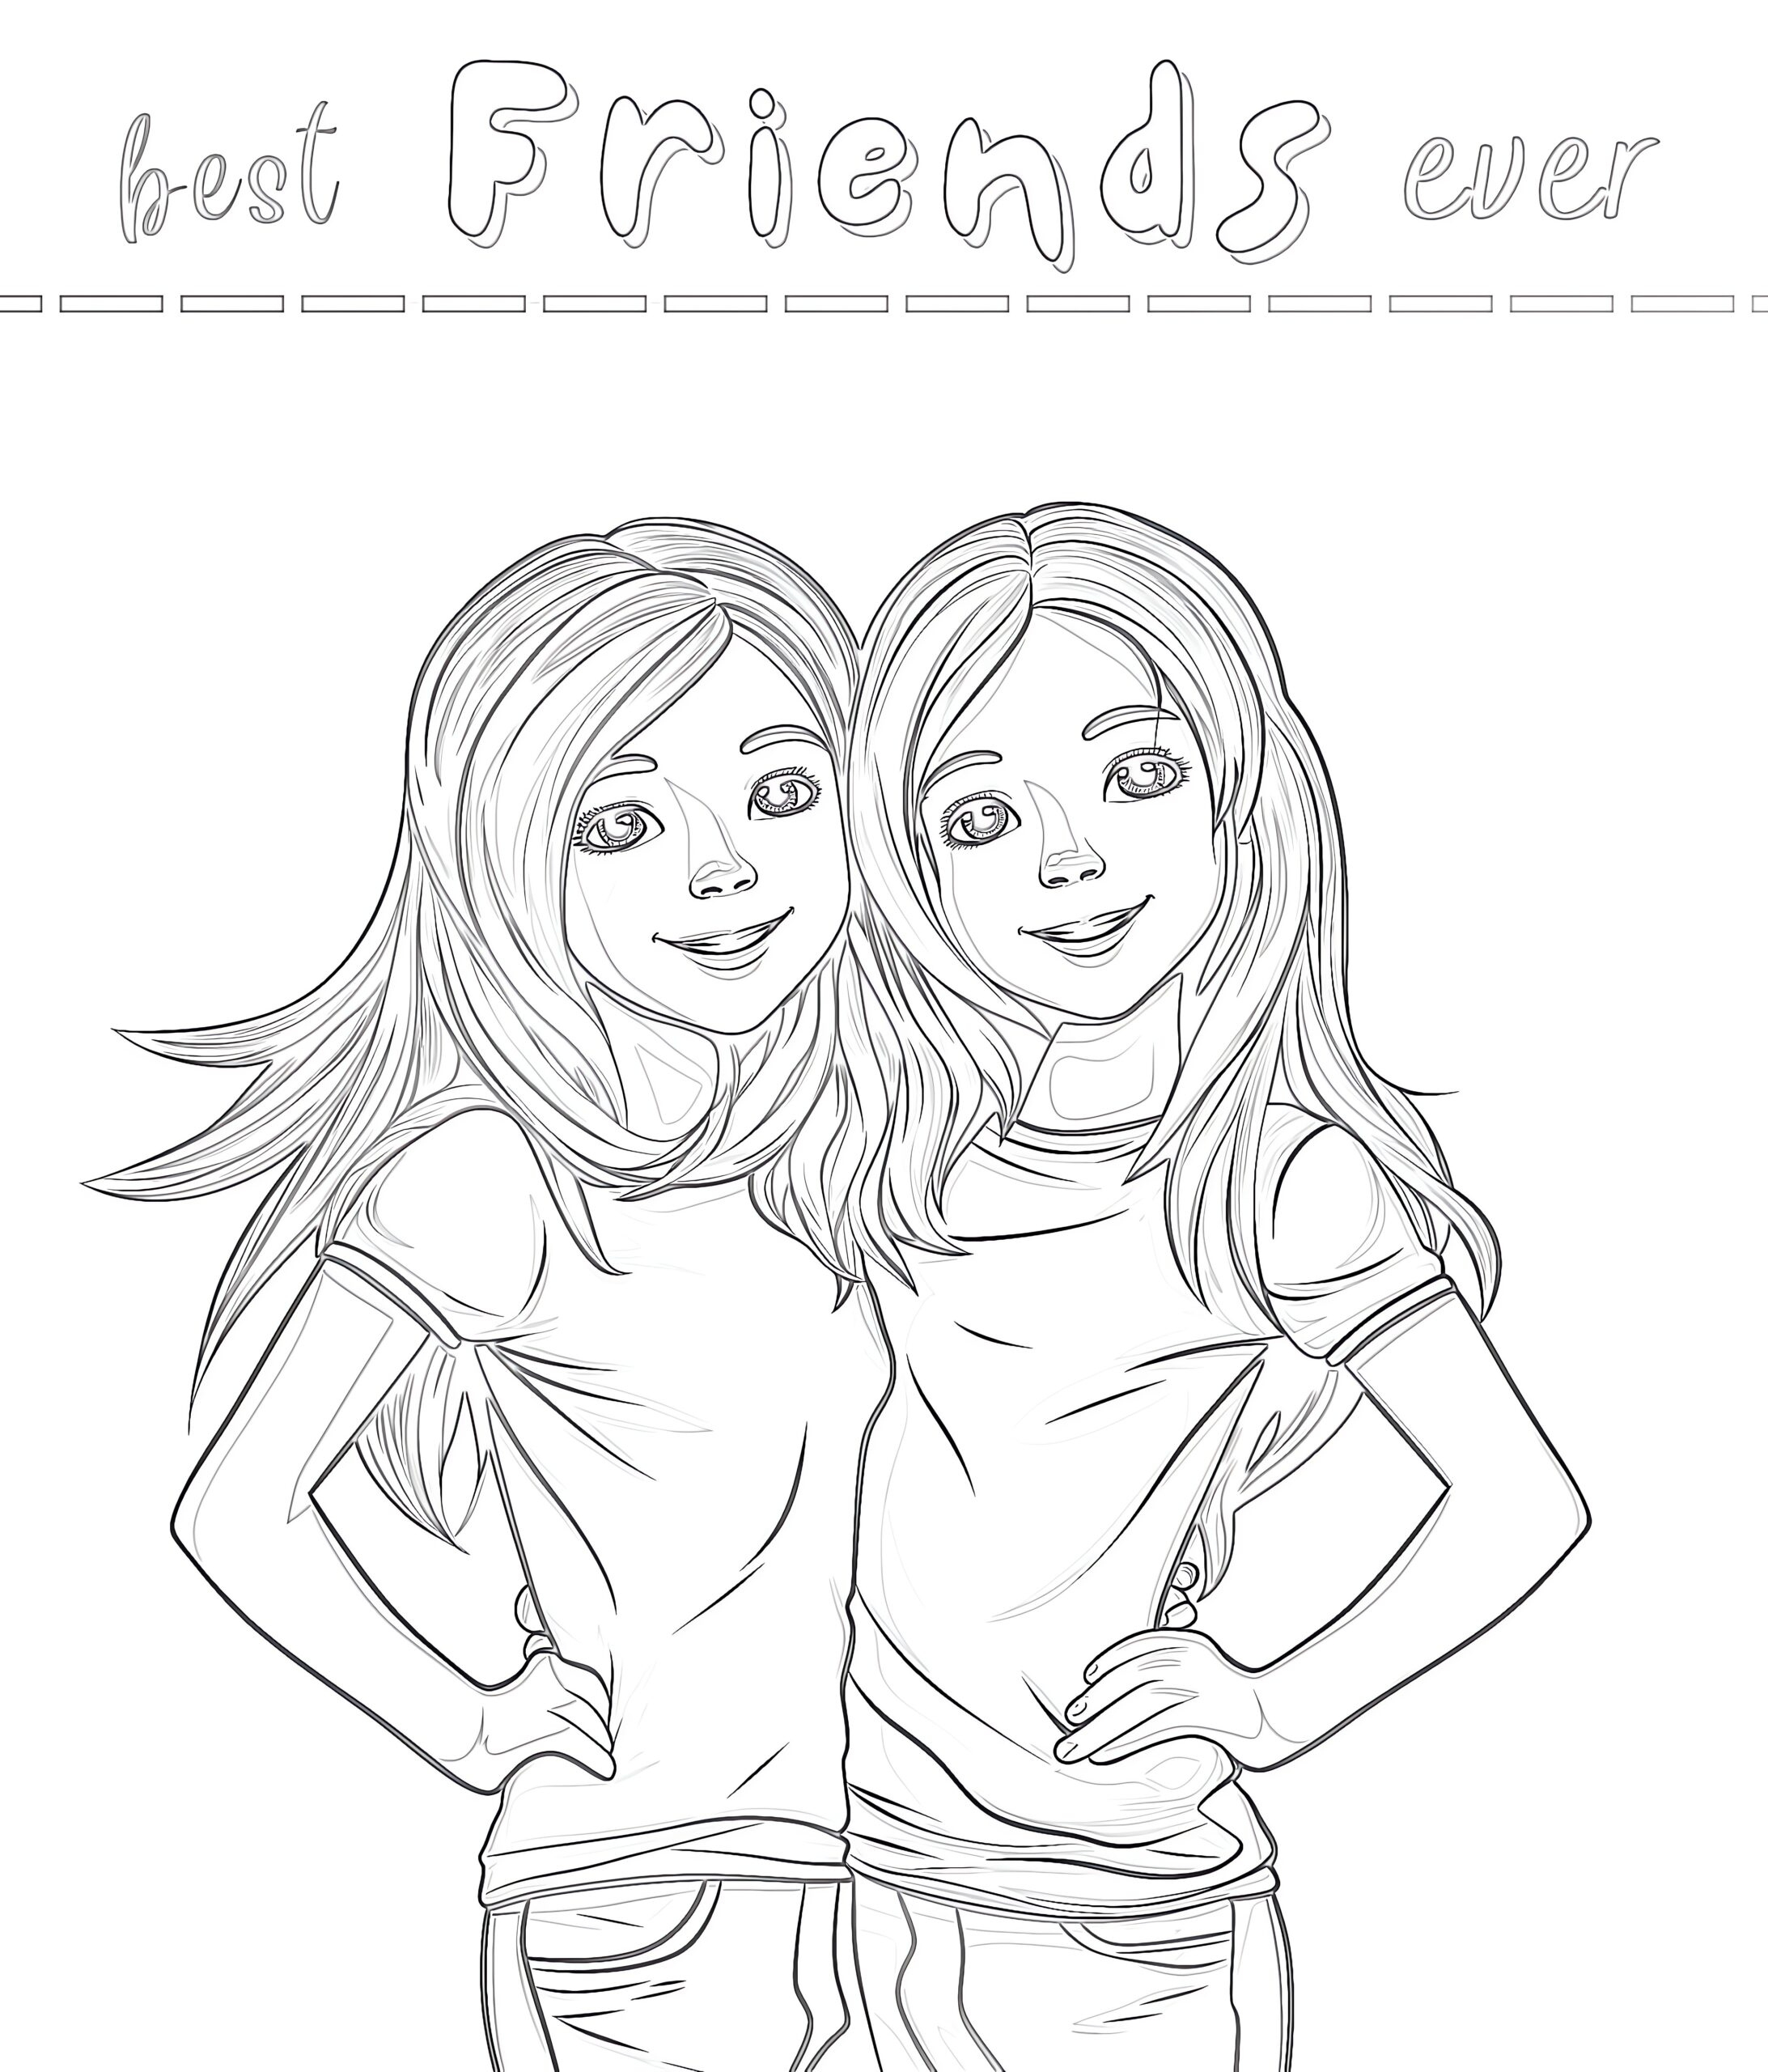 Best Friends Coloring Page | Coloring Pages Mimi Panda with regard to Free Printable Bff Coloring Pages